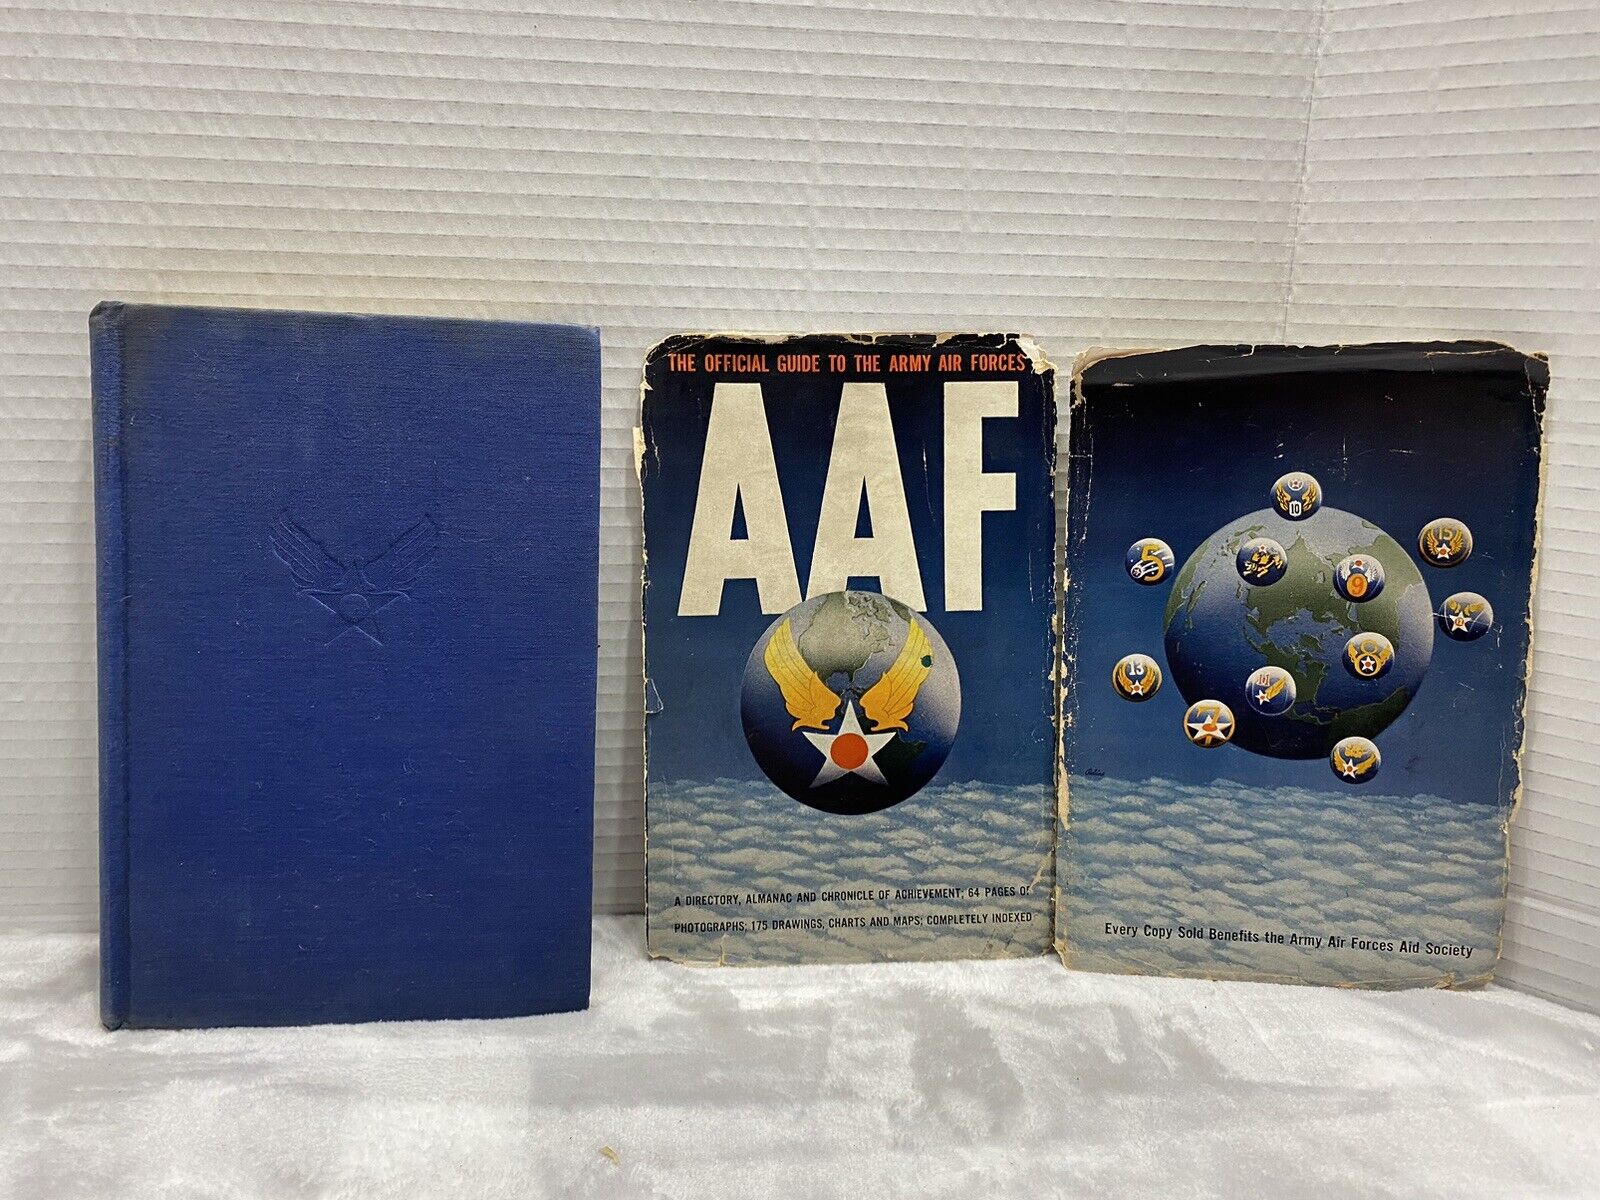 AAF THE OFFICIAL GUIDE TO THE ARMY AIR FORCES 1944 Hardcover Vintage